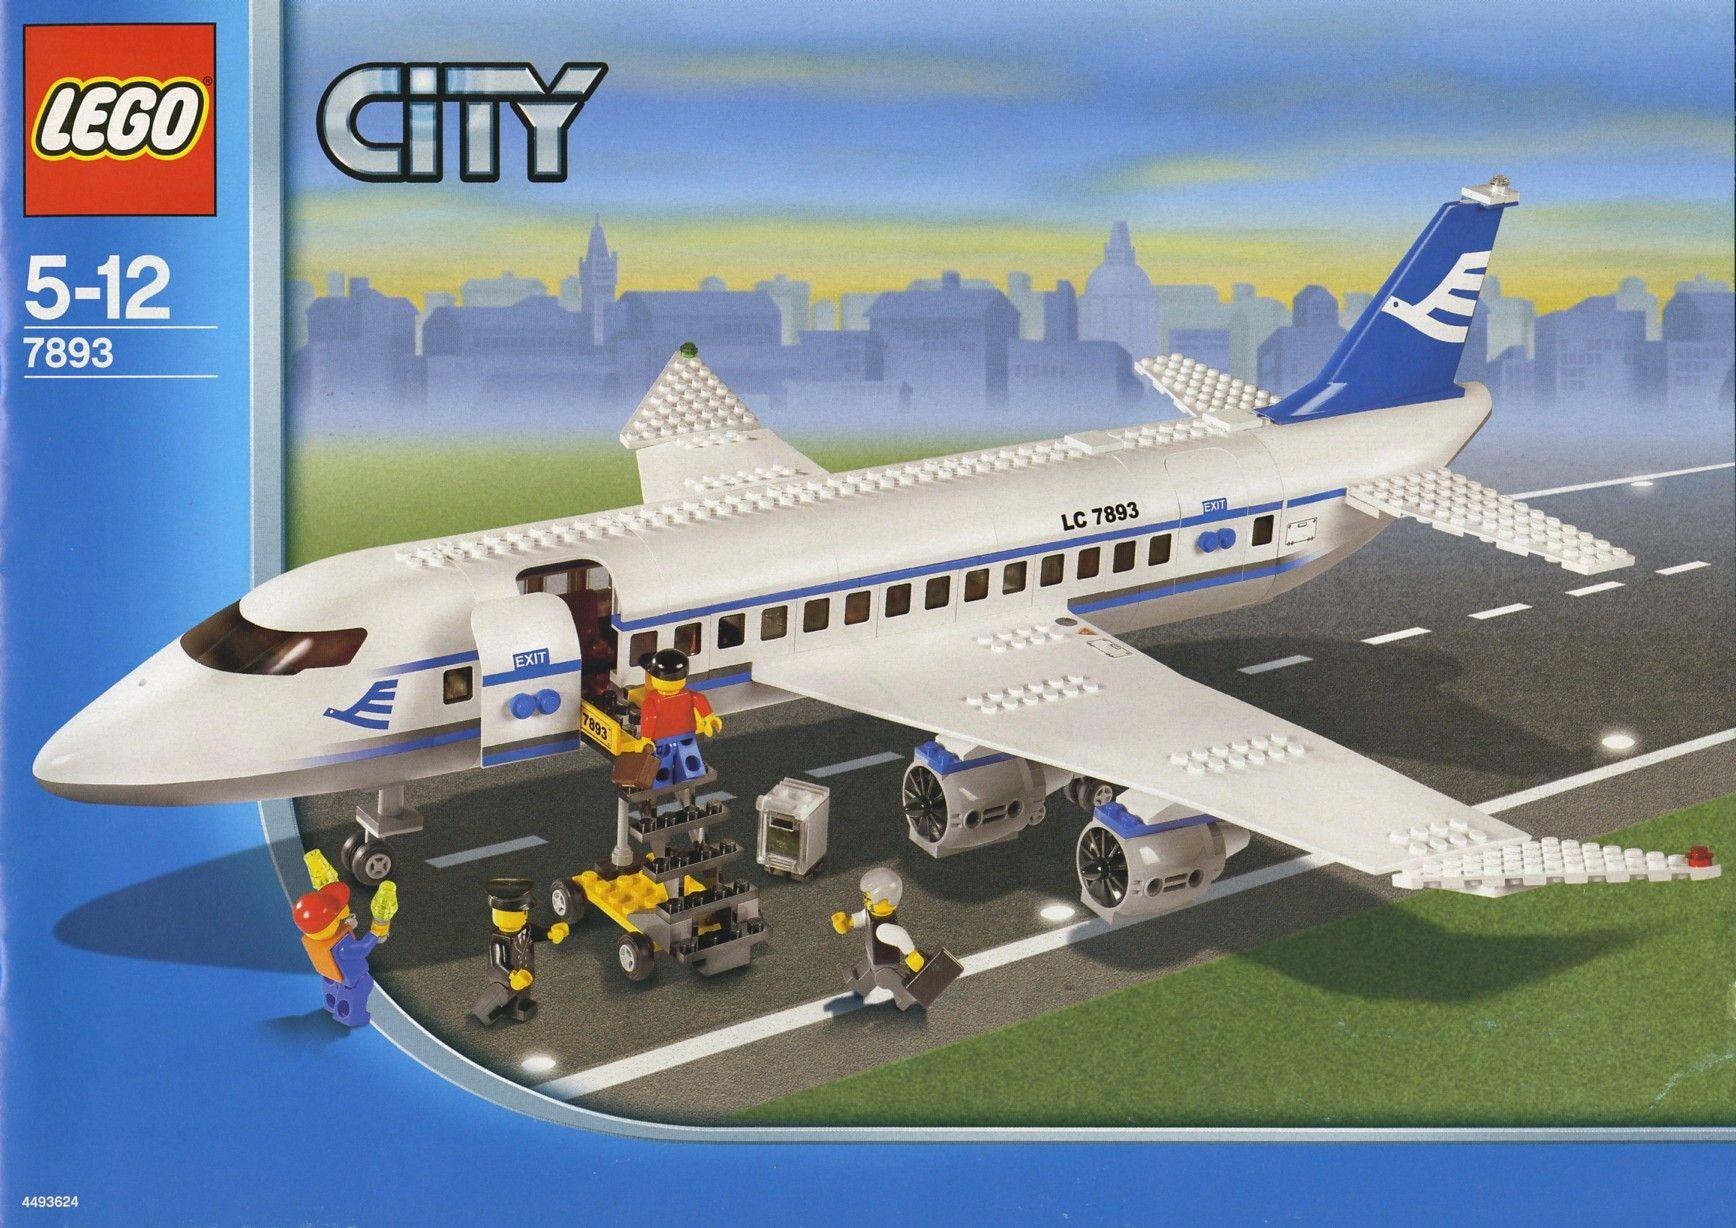 LEGO City Airlines Logo - City | Tagged 'Airport' | Brickset: LEGO set guide and database